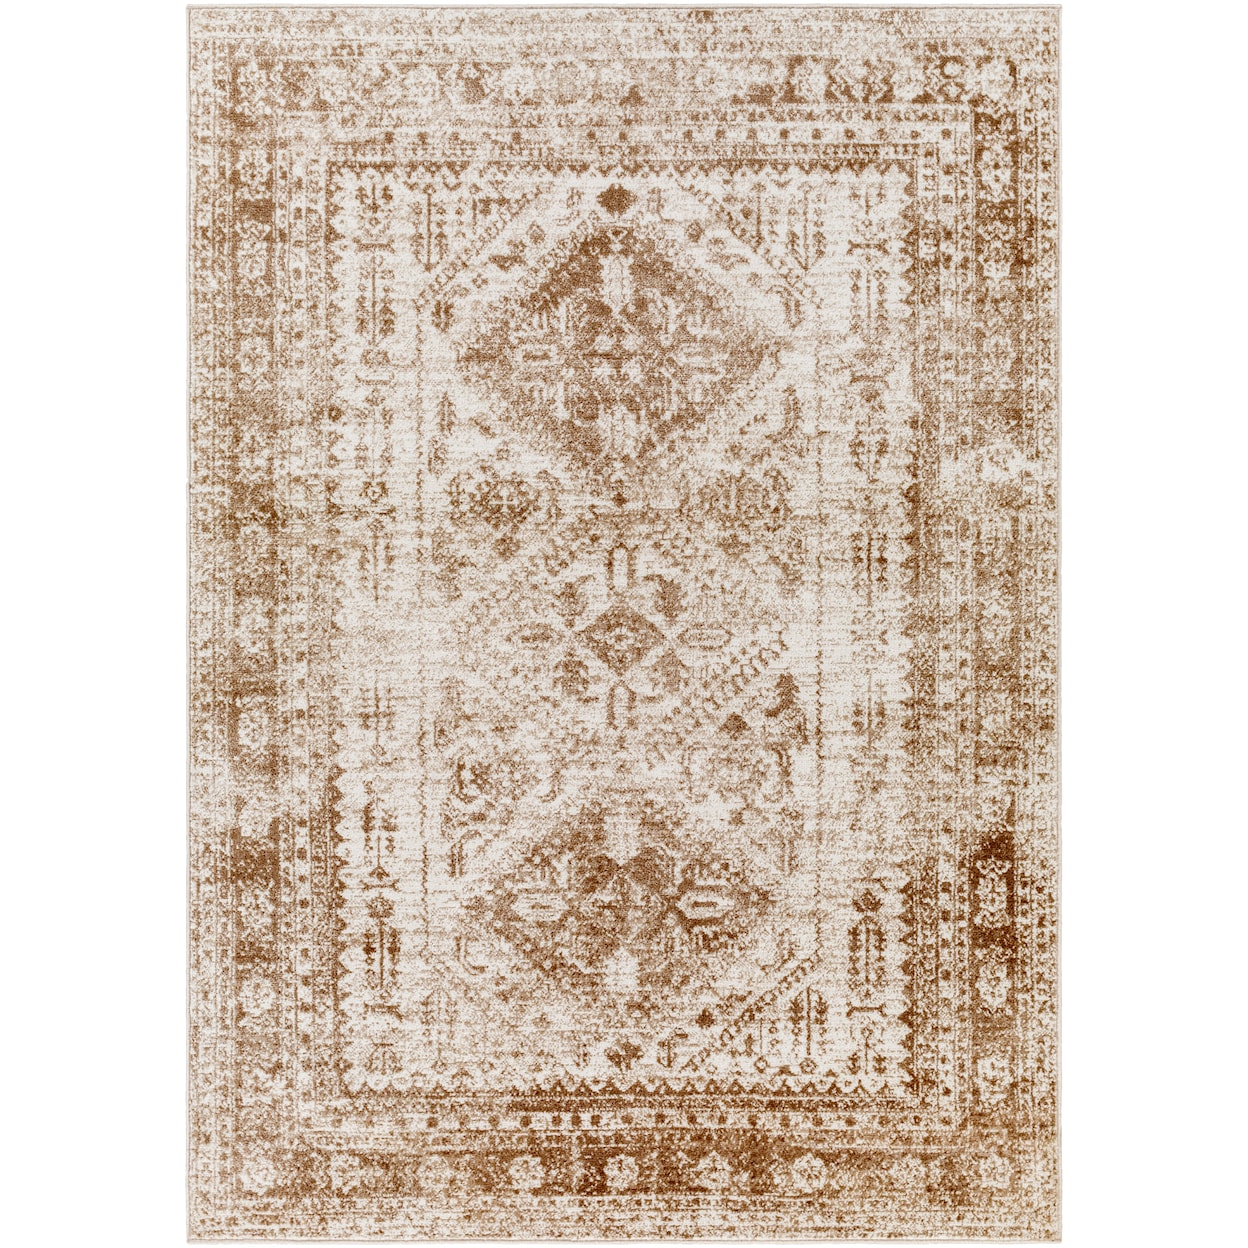 Ruby-Gordon Accents Monte Carlo Rugs